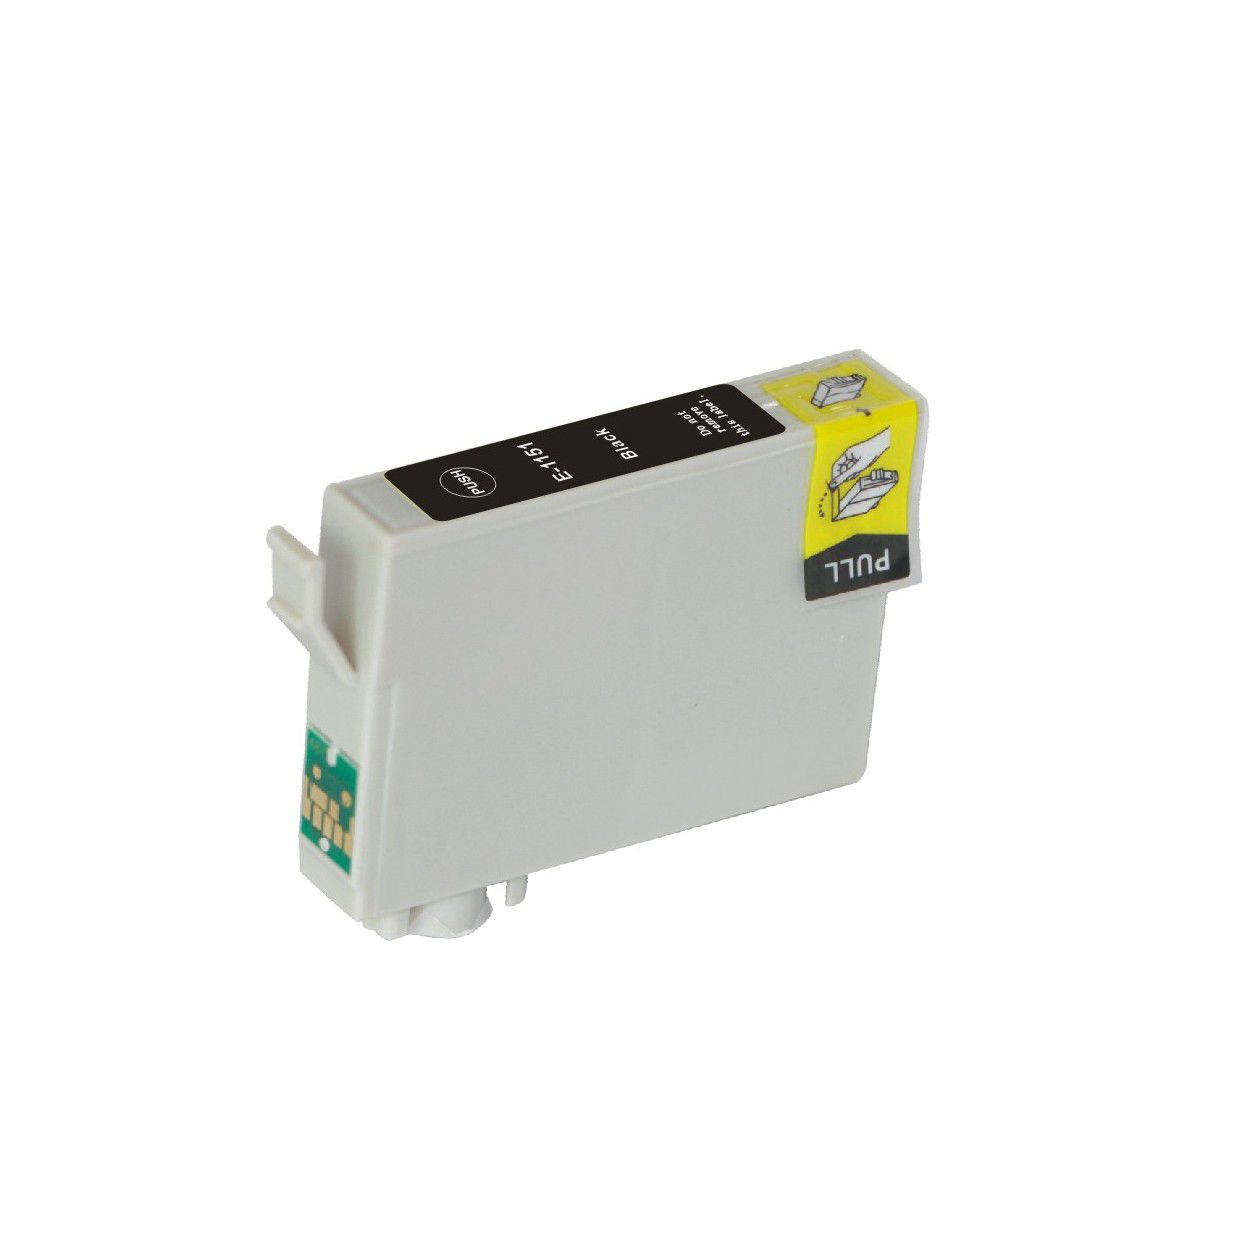 Compatible ink cartridge for Epson T1151